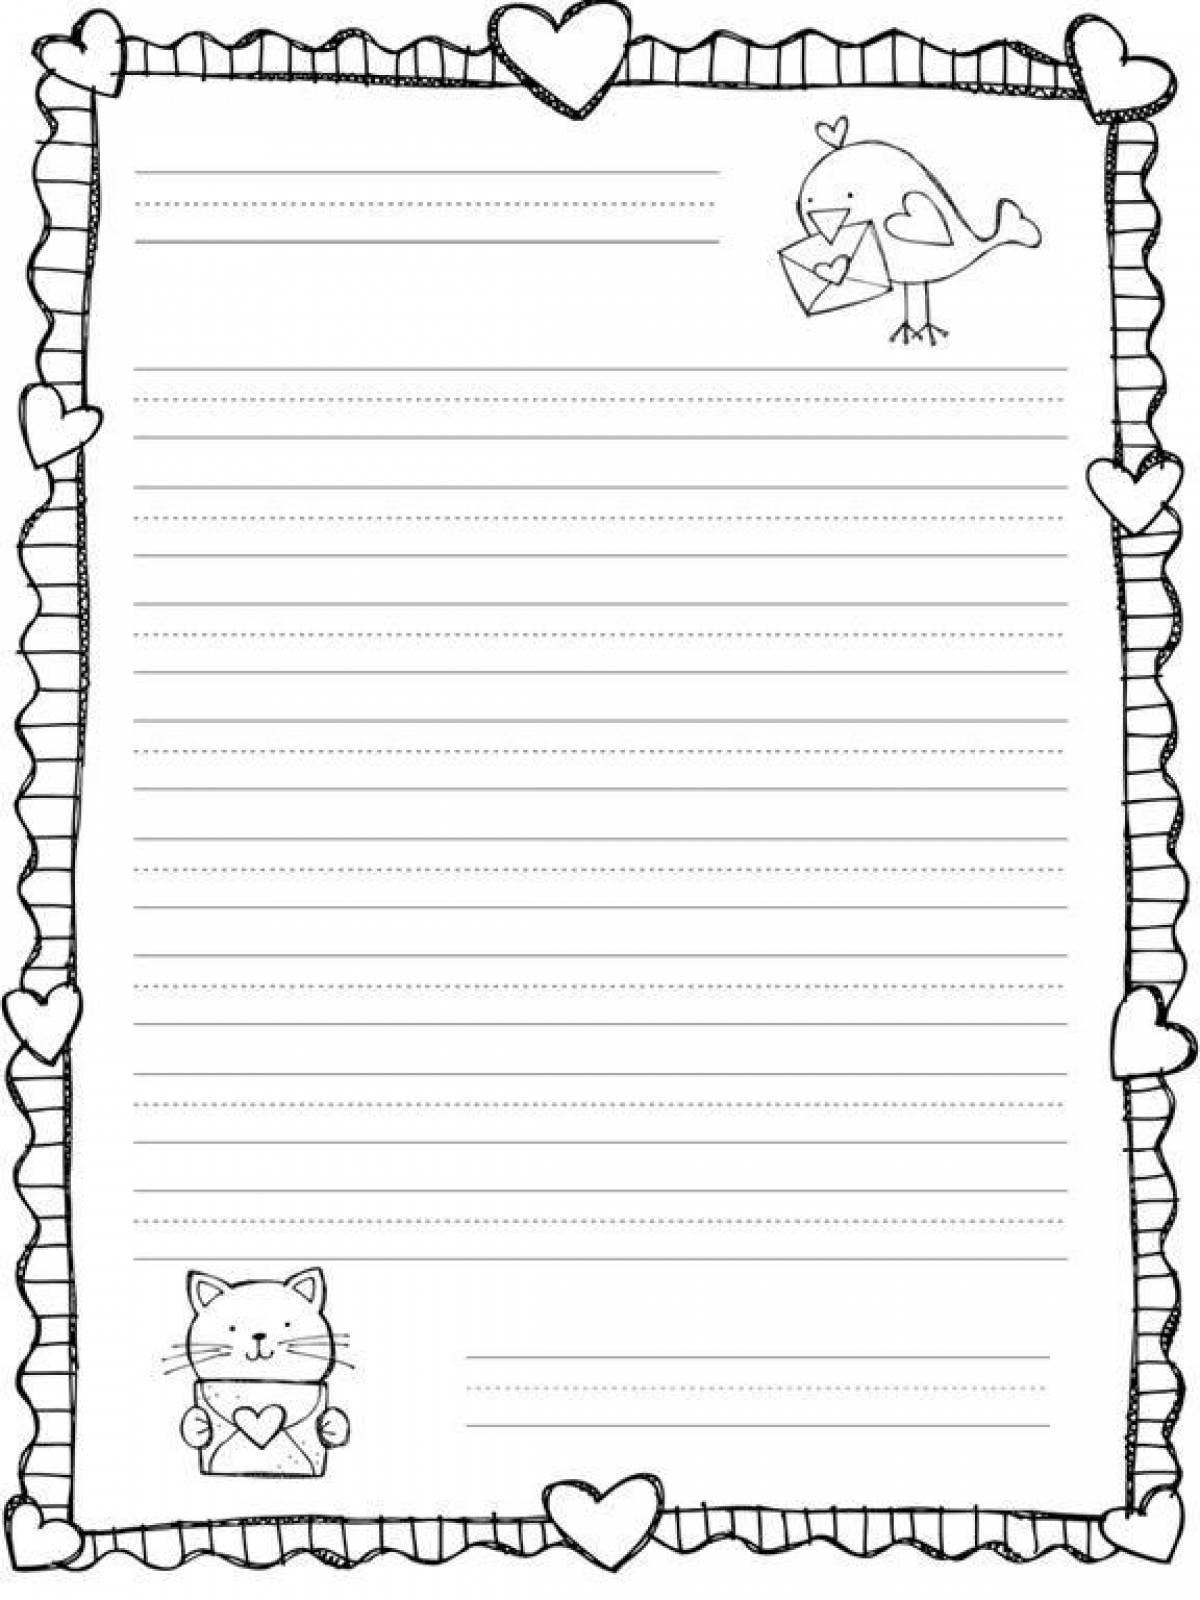 Fun coloring letter to soldier template